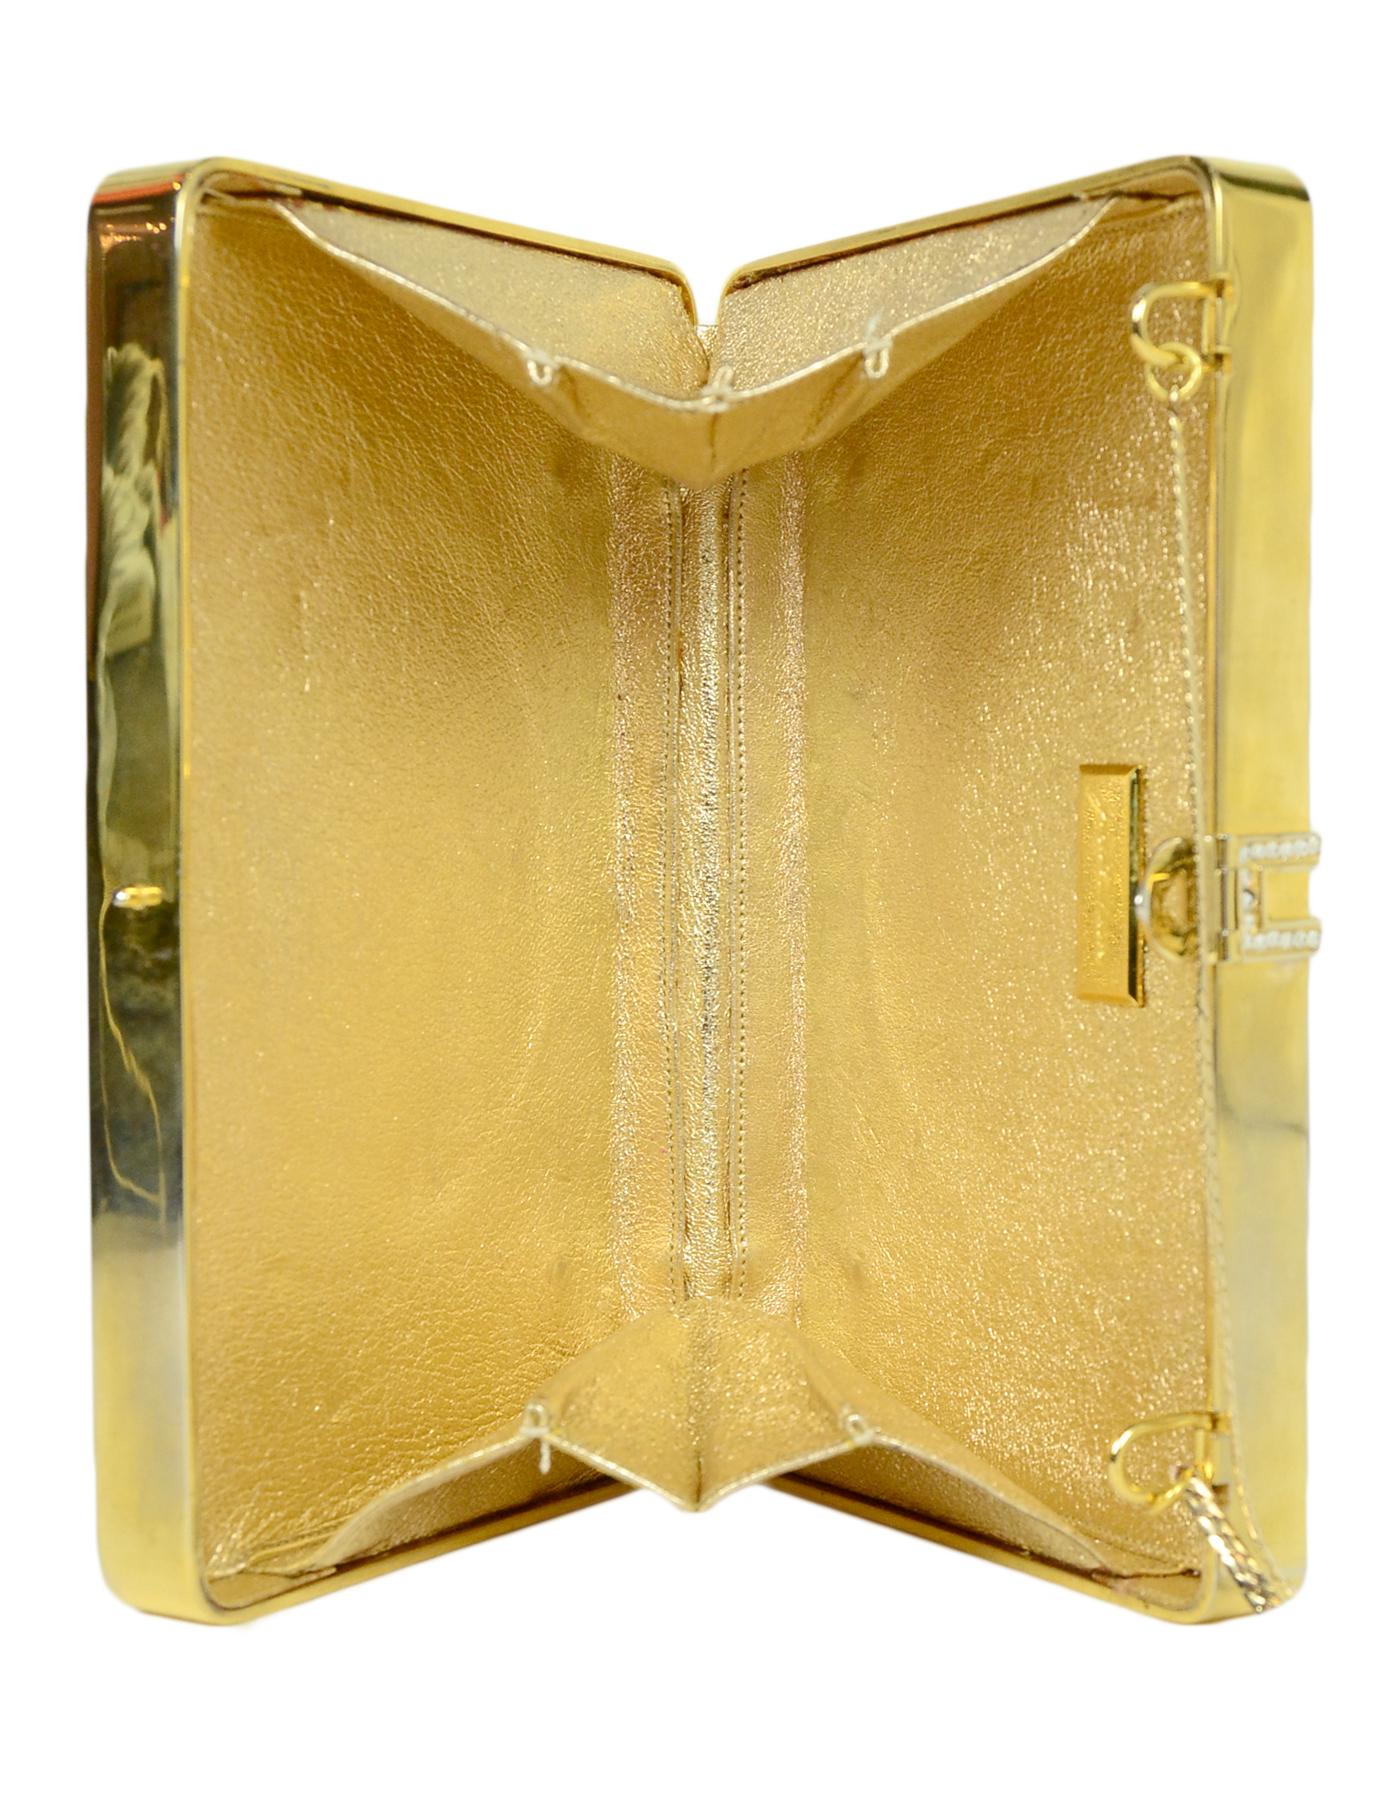 Judith Leiber Gold Leather Miniaudiere Bag with Chain Strap and Crystal Detail 7